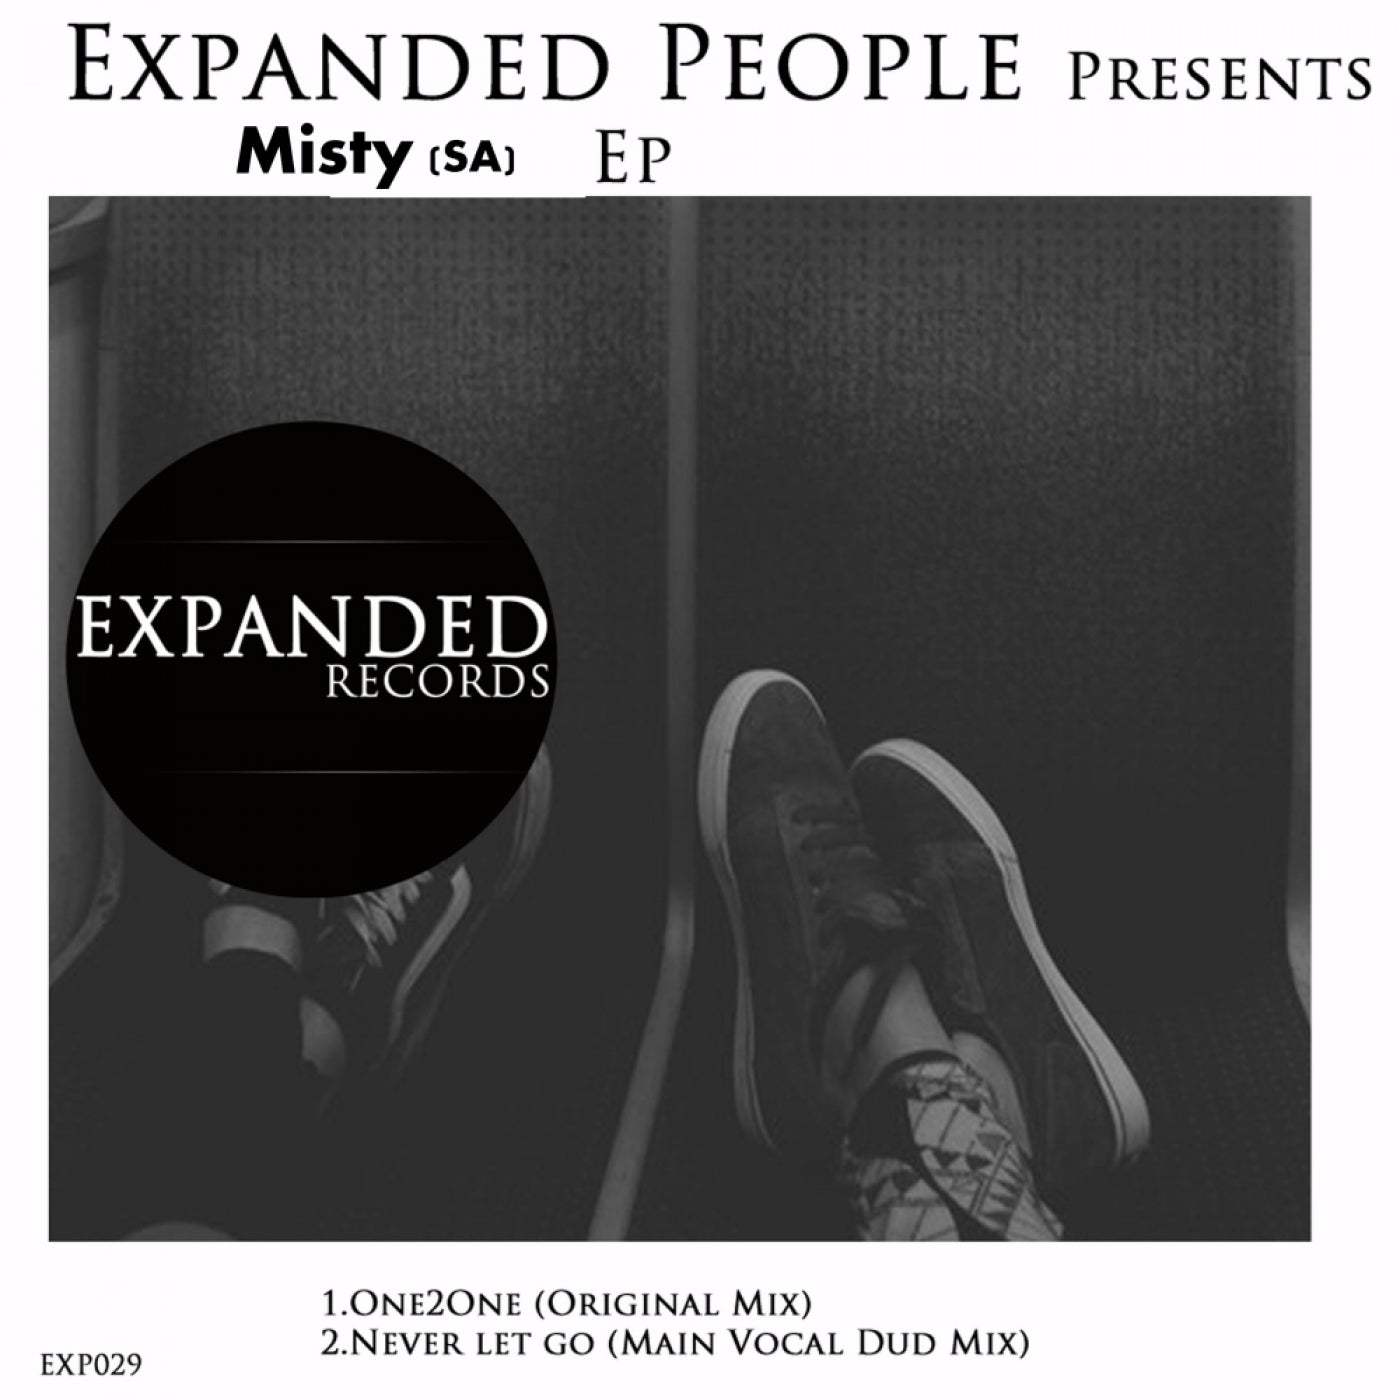 Expanded People Present Misty Ep